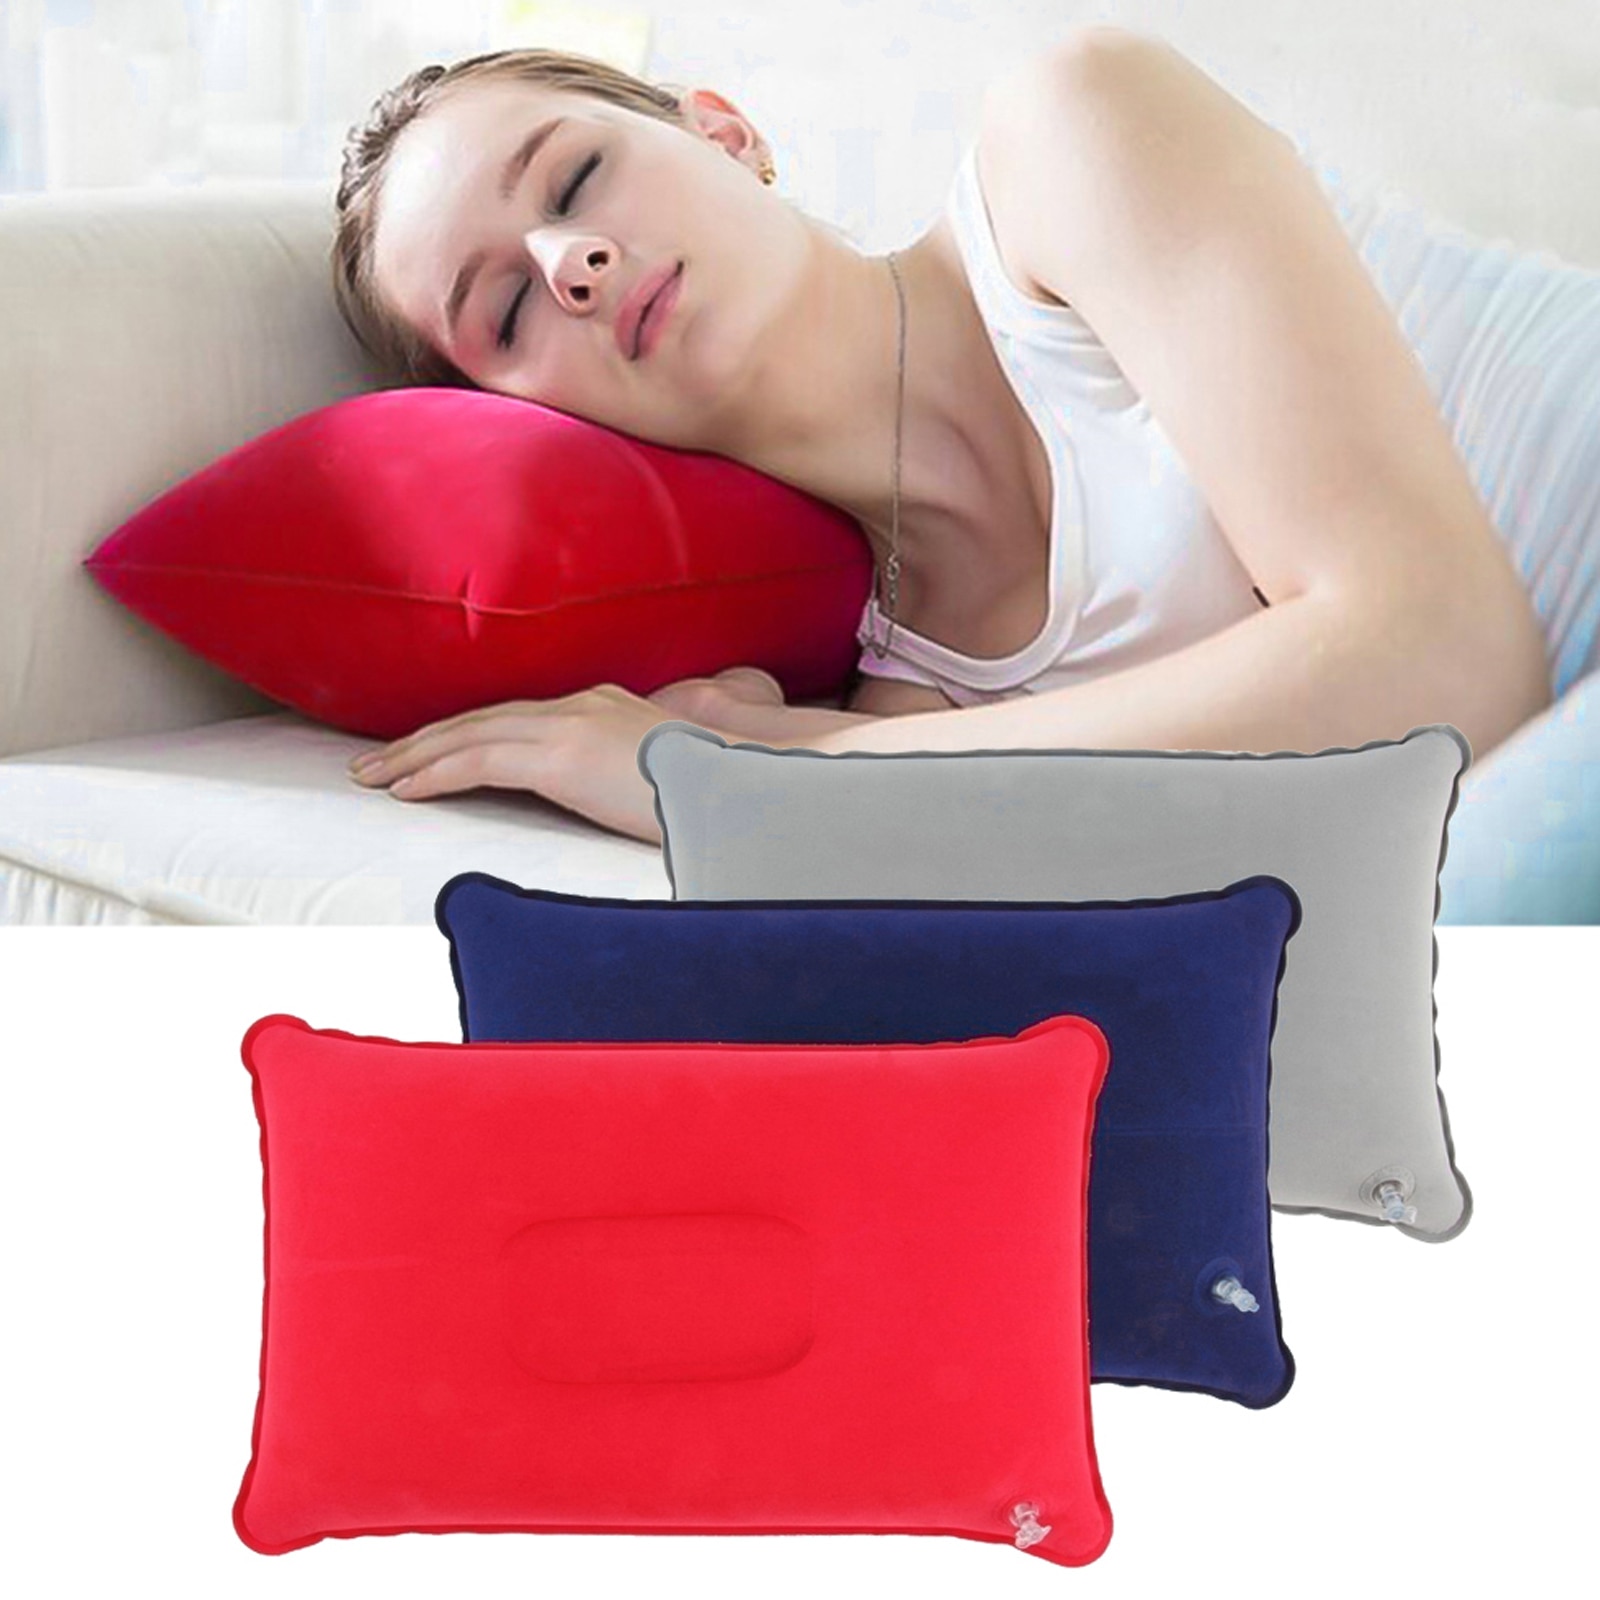 Outdoor Inflatable Travel Neck Office Cushion Head Rest Support Care Decorative Travel Pillow Air Cushion Camping Sleeping Bag